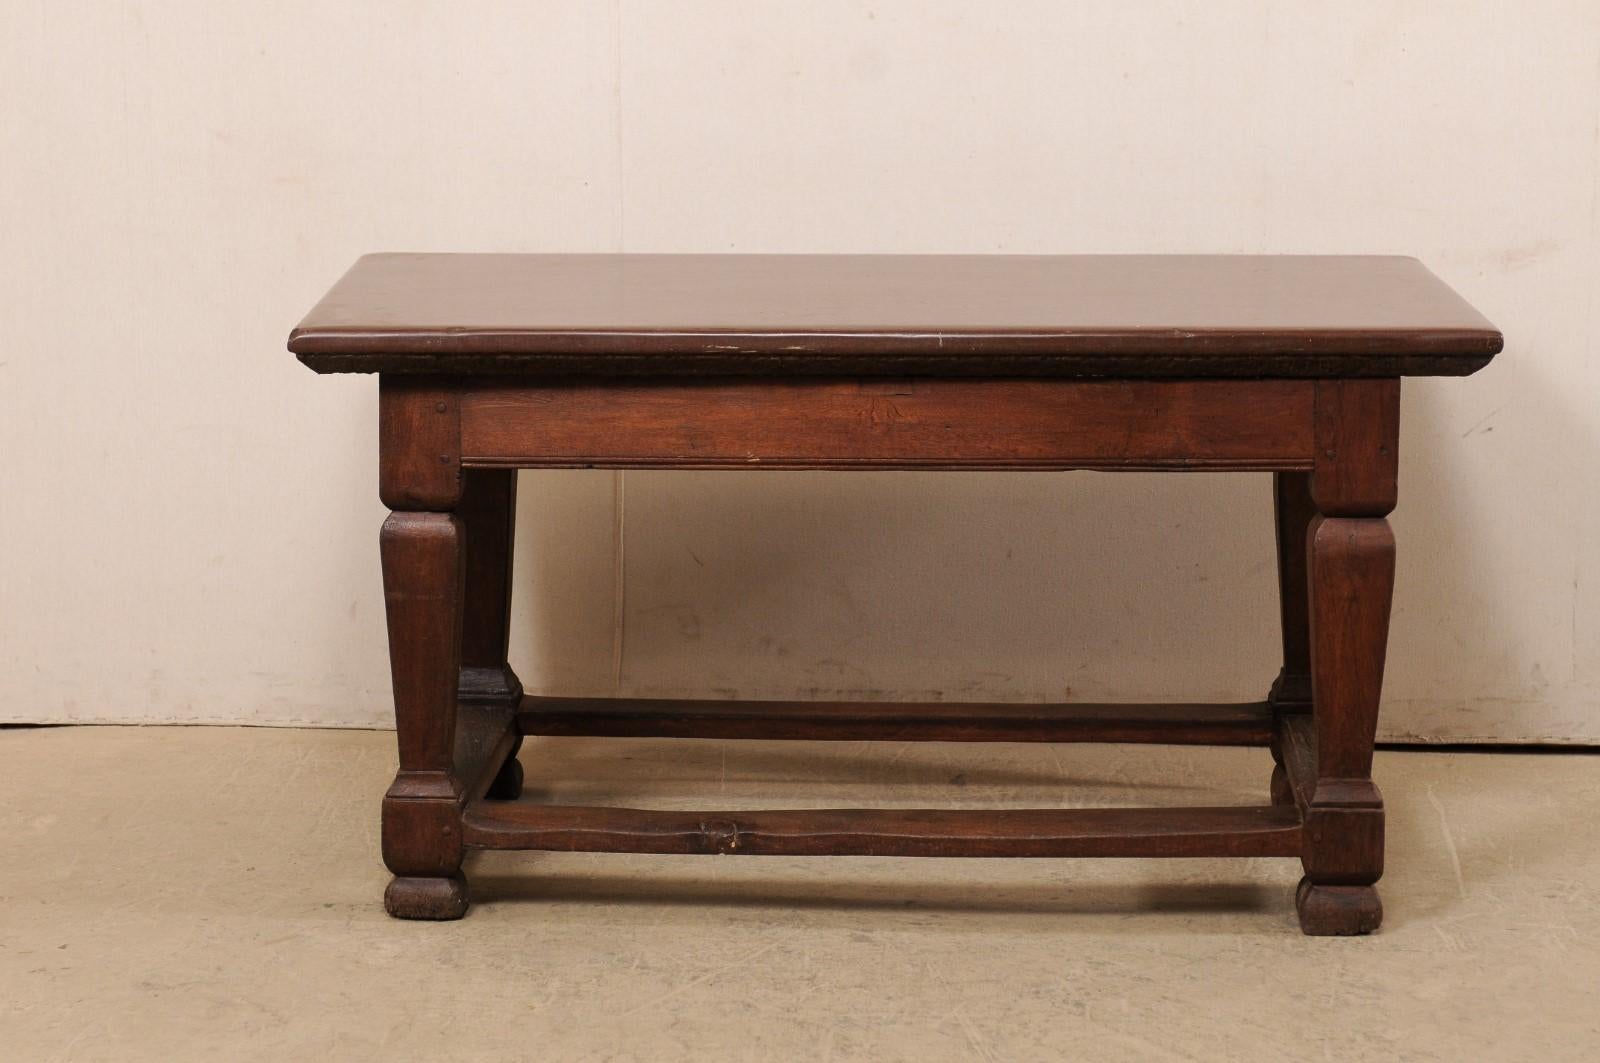 A Swedish period Baroque stone top table from the early 18th century. This antique kitchen table from Sweden features it's original stone top, rectangular in shape, which rests atop a plain apron, and raised upon four robust baluster-carved legs.